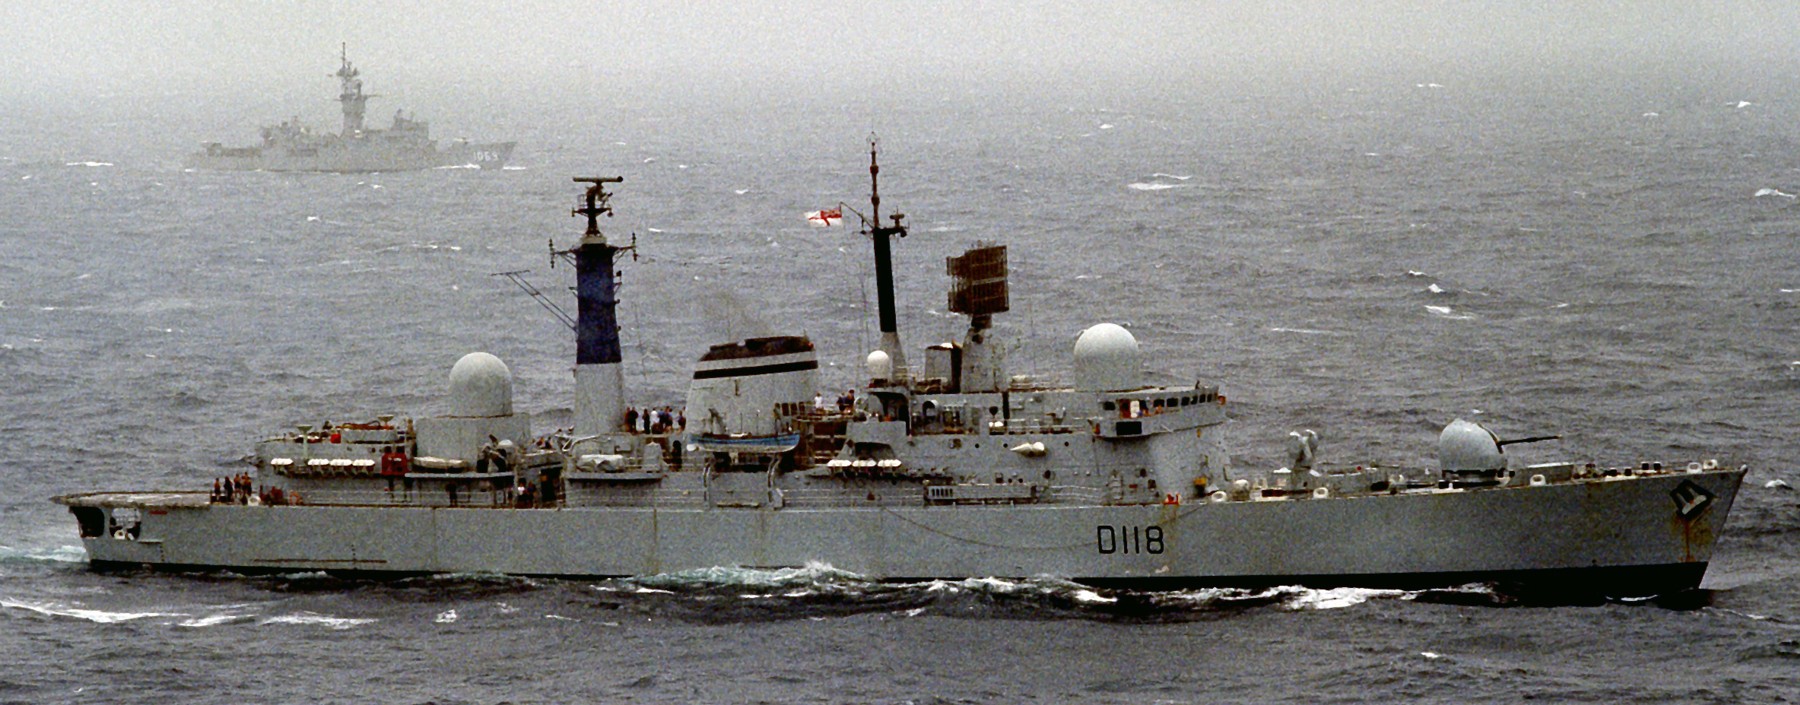 d 108 hms coventry sheffield class type 42 destroyer